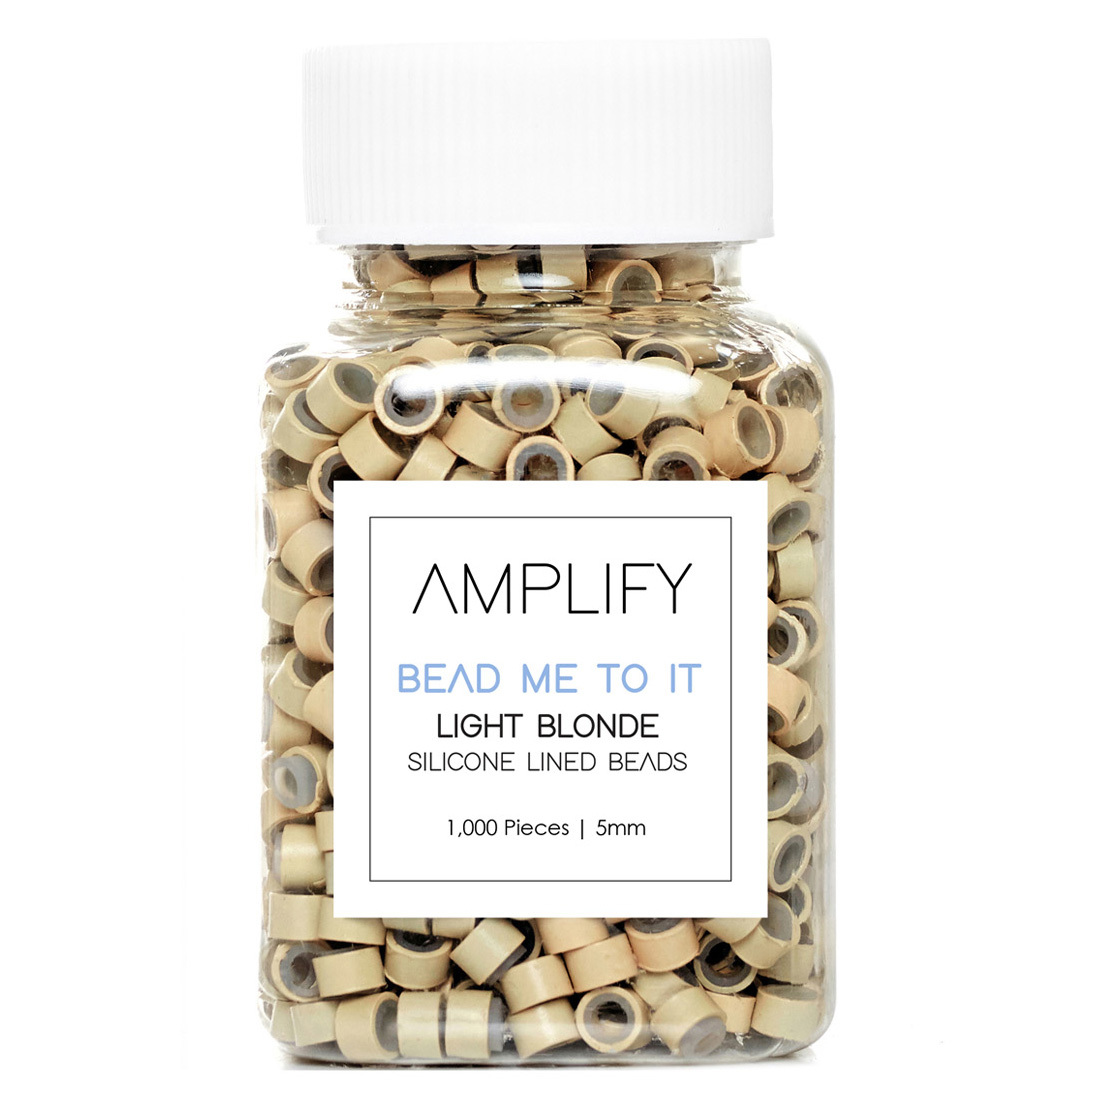 AMPLIFY TOOLS & SUPPLIES: NANO Bead Me To It: Light Blonde 3mm Beads - 1300ct